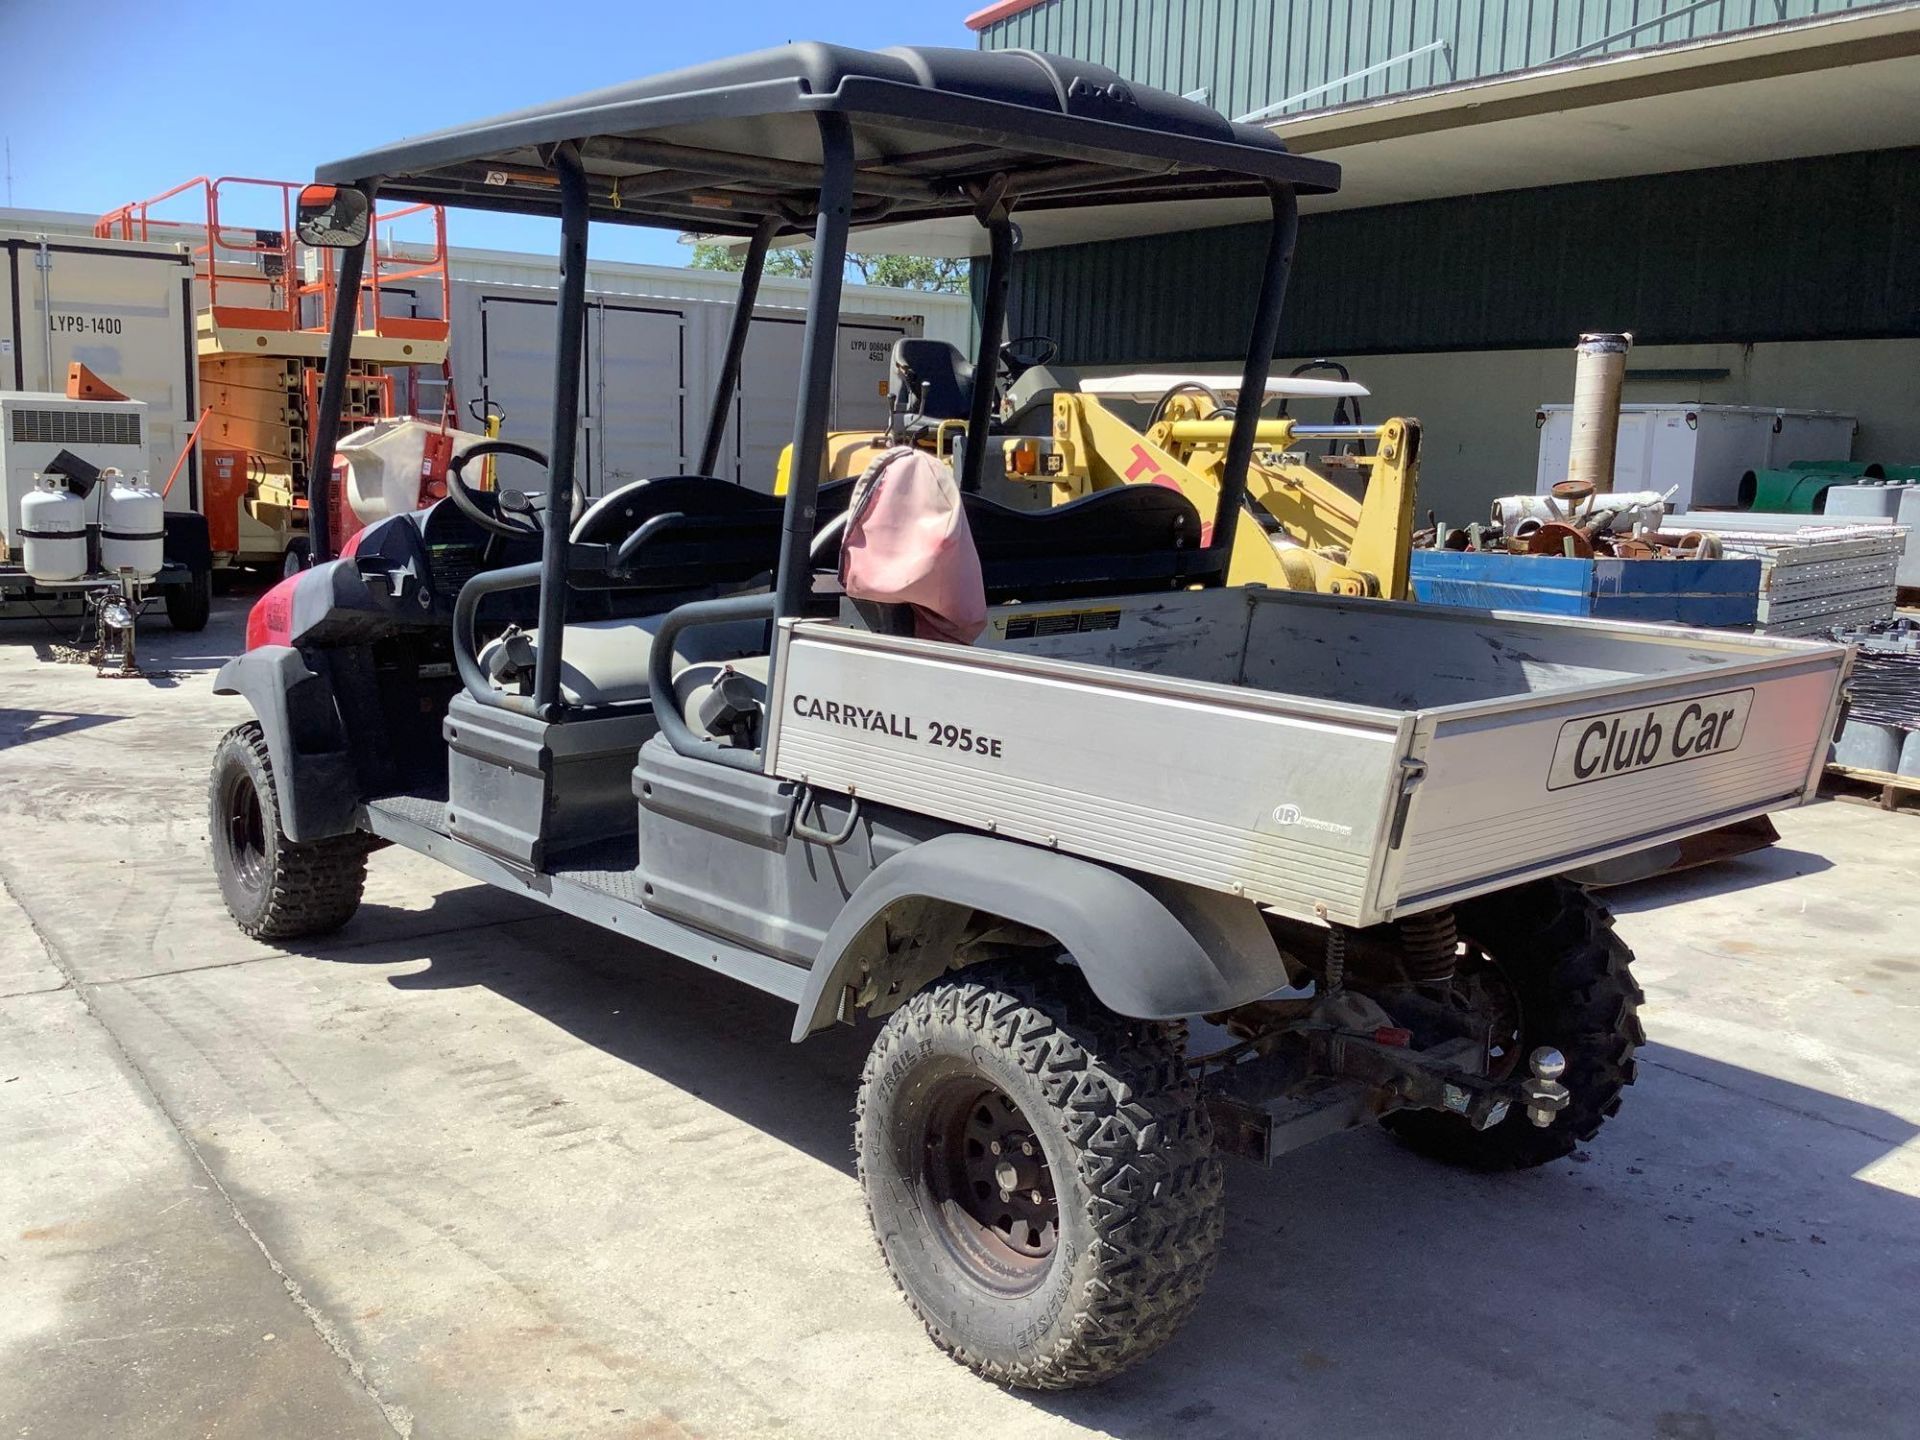 CLUB CAR CARYALL 295SE 4x4 INTELLITRAK GOLF CART, GAS POWERED , MANUAL DUMP BED, HITCH IN FRONT & BA - Image 10 of 19